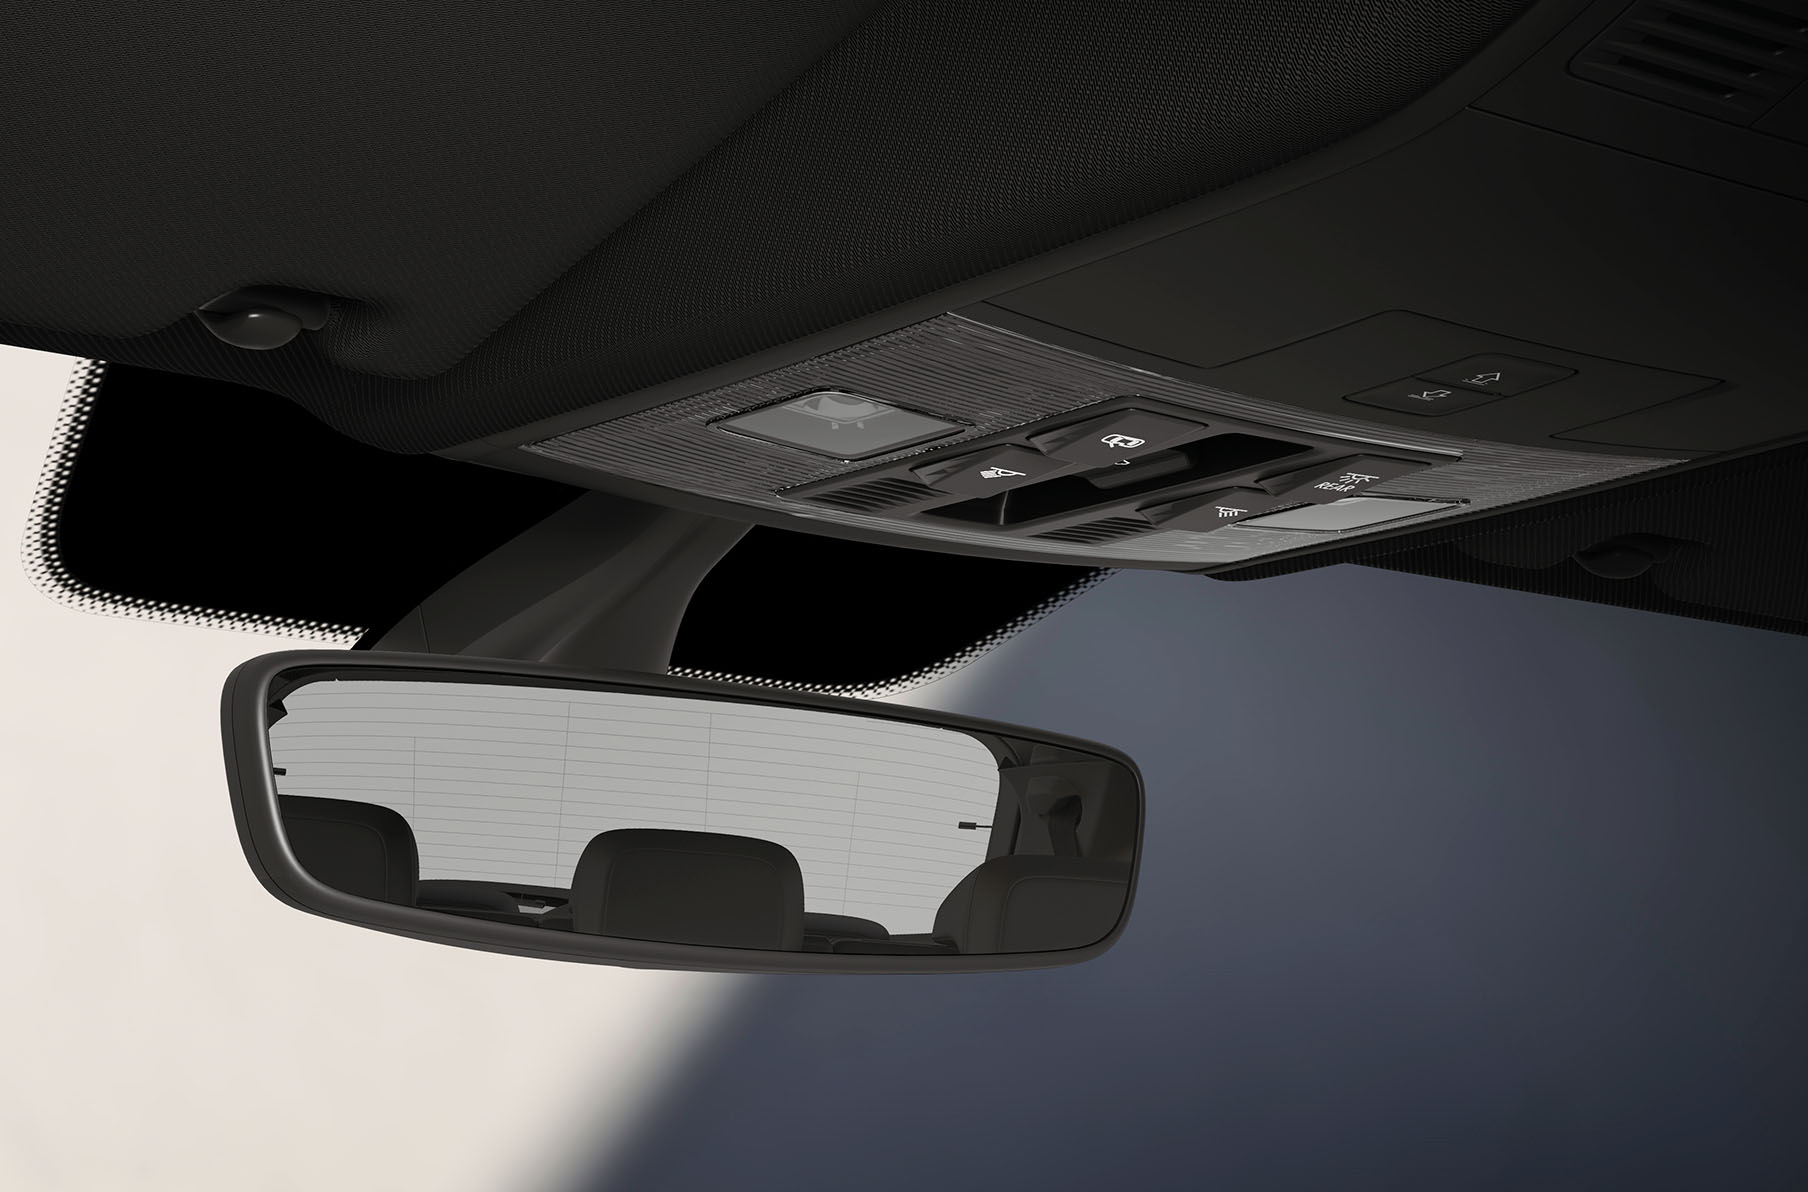 The new SEAT Tarraco XPERIENCE auto-dimming rear view mirror